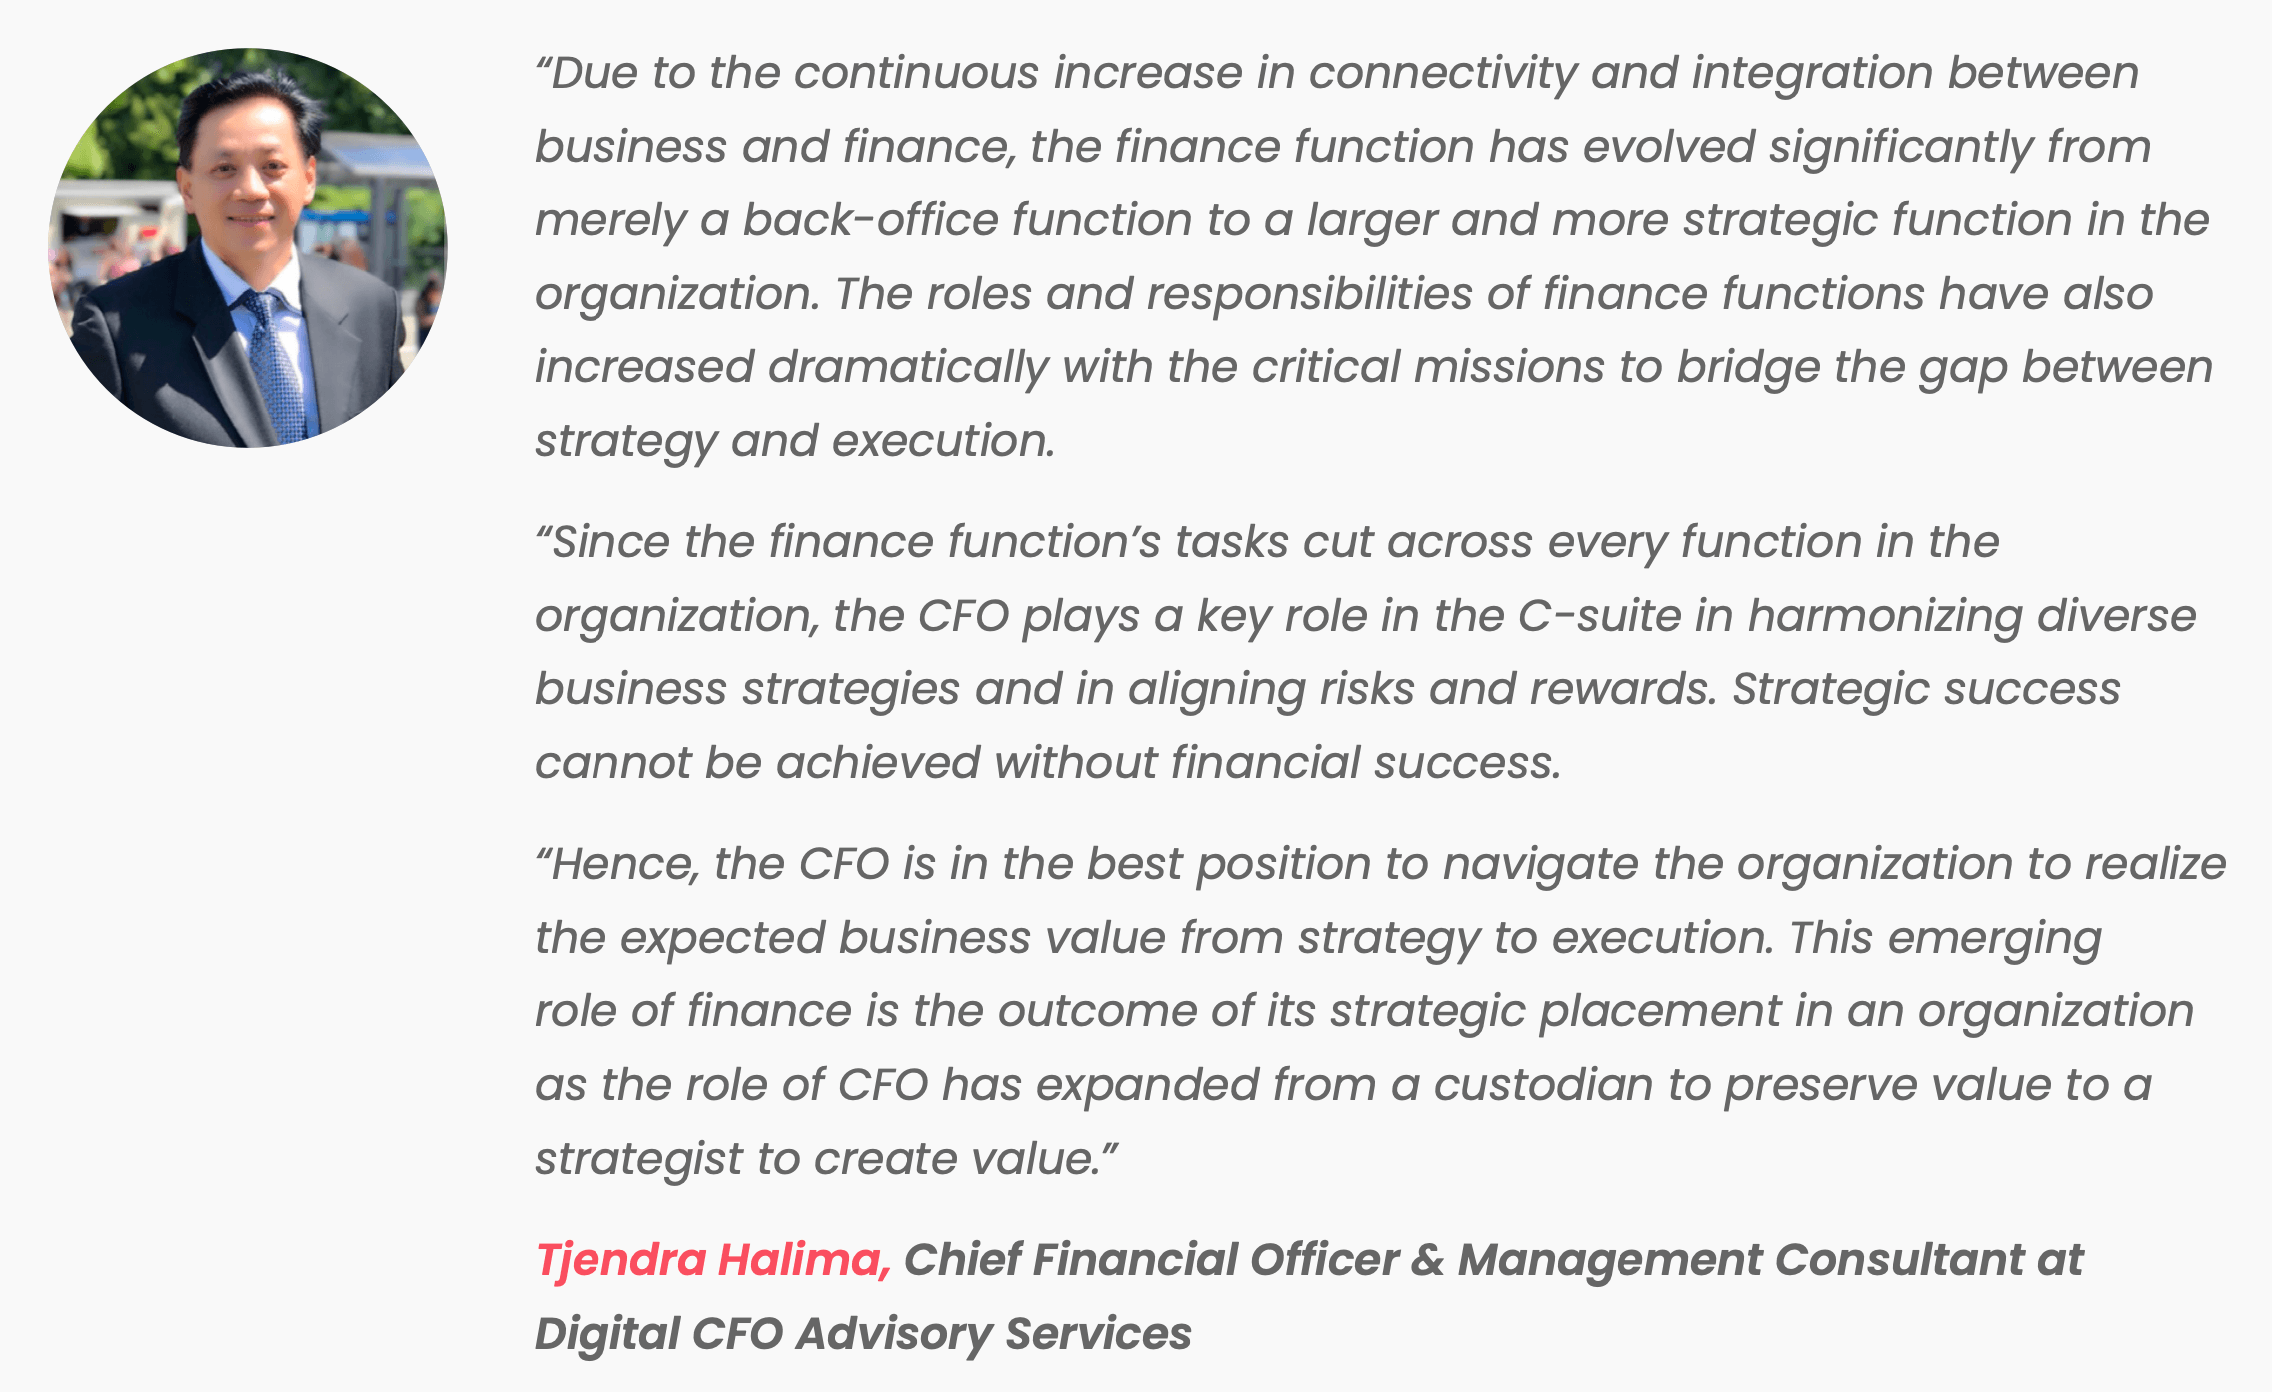 Benefits of finance transformation quote from Tjendra Halima